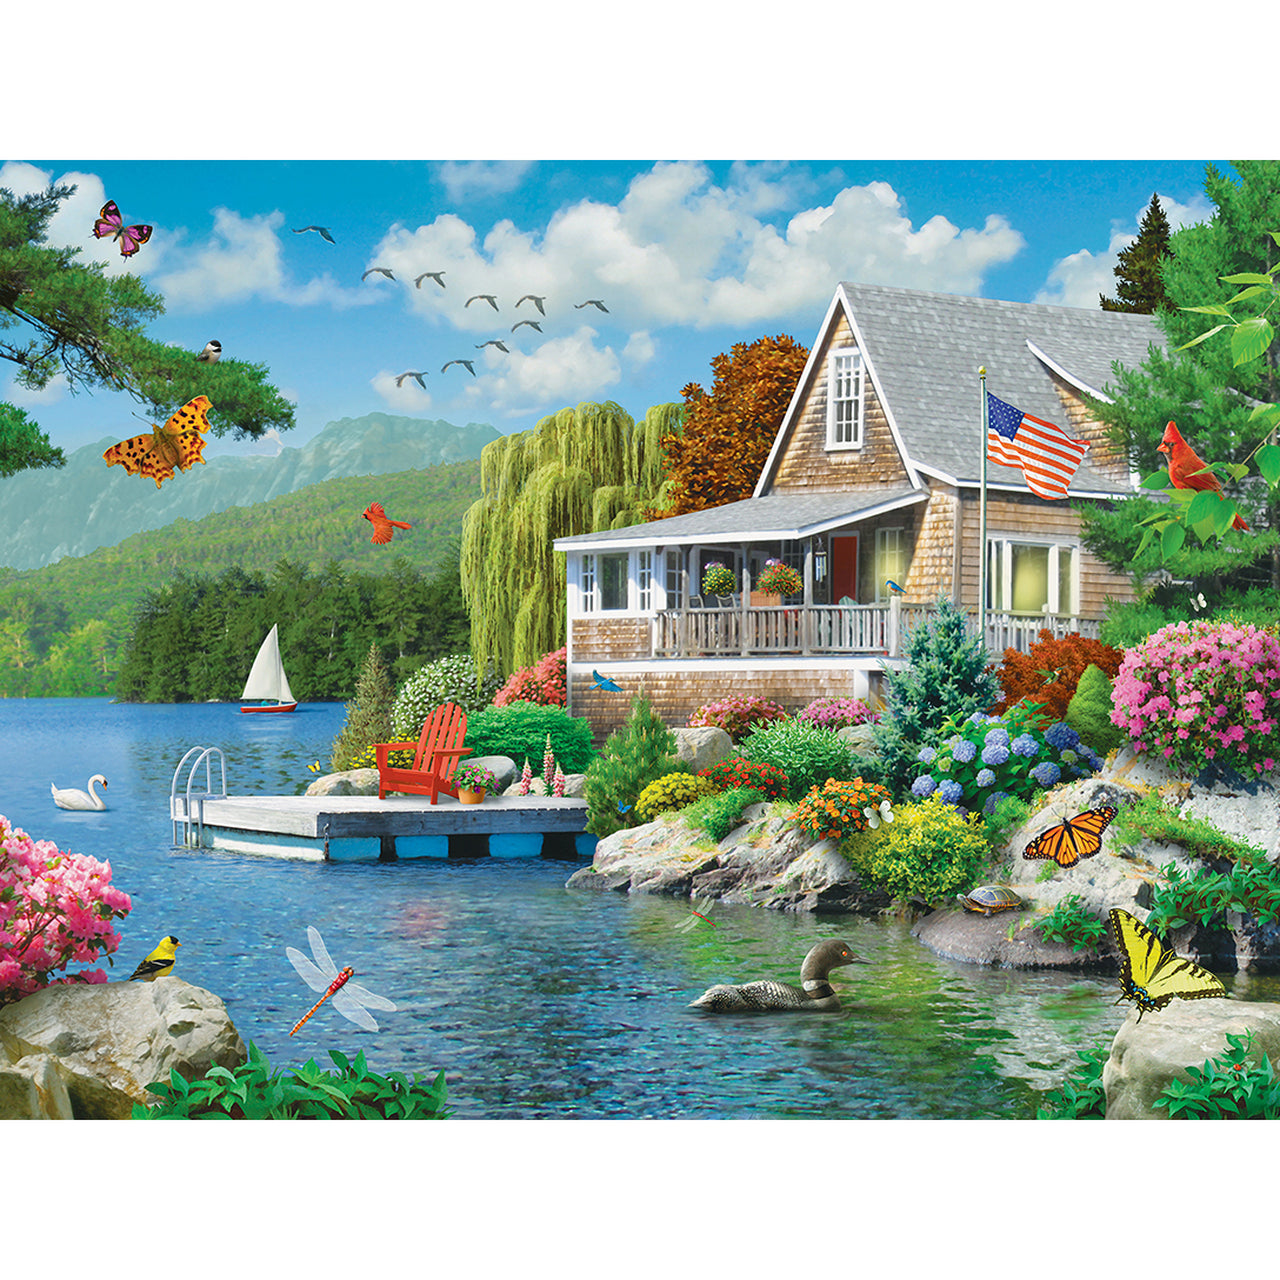 Memory Lane Lakeside Memories - Large 300 Piece EZGrip Jigsaw Puzzle by MasterPieces